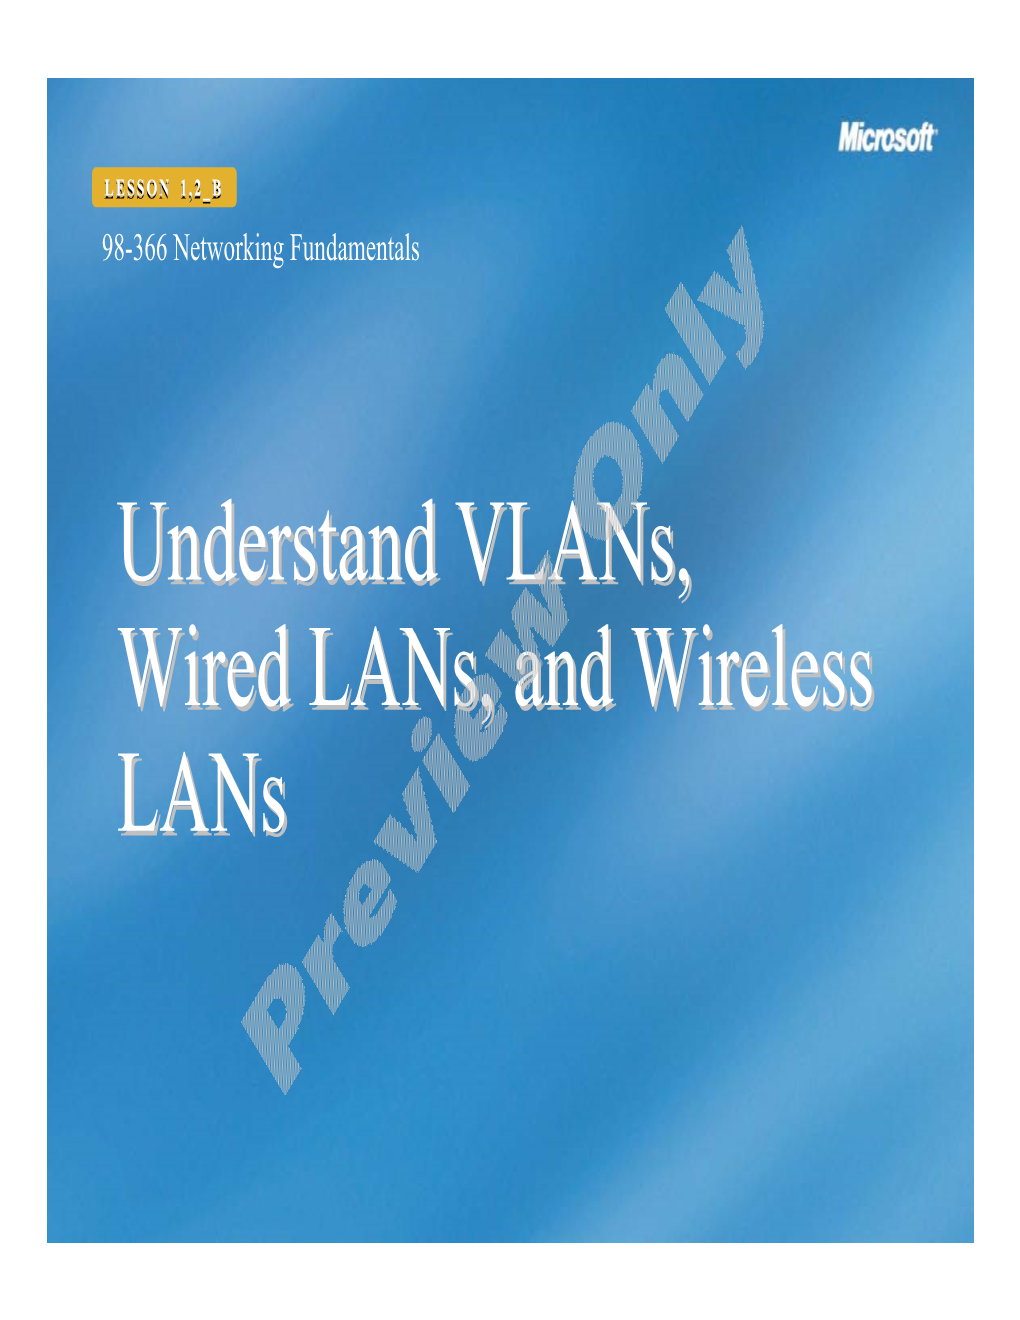 Understand Vlans, Wired Lans, and Wireless Lans